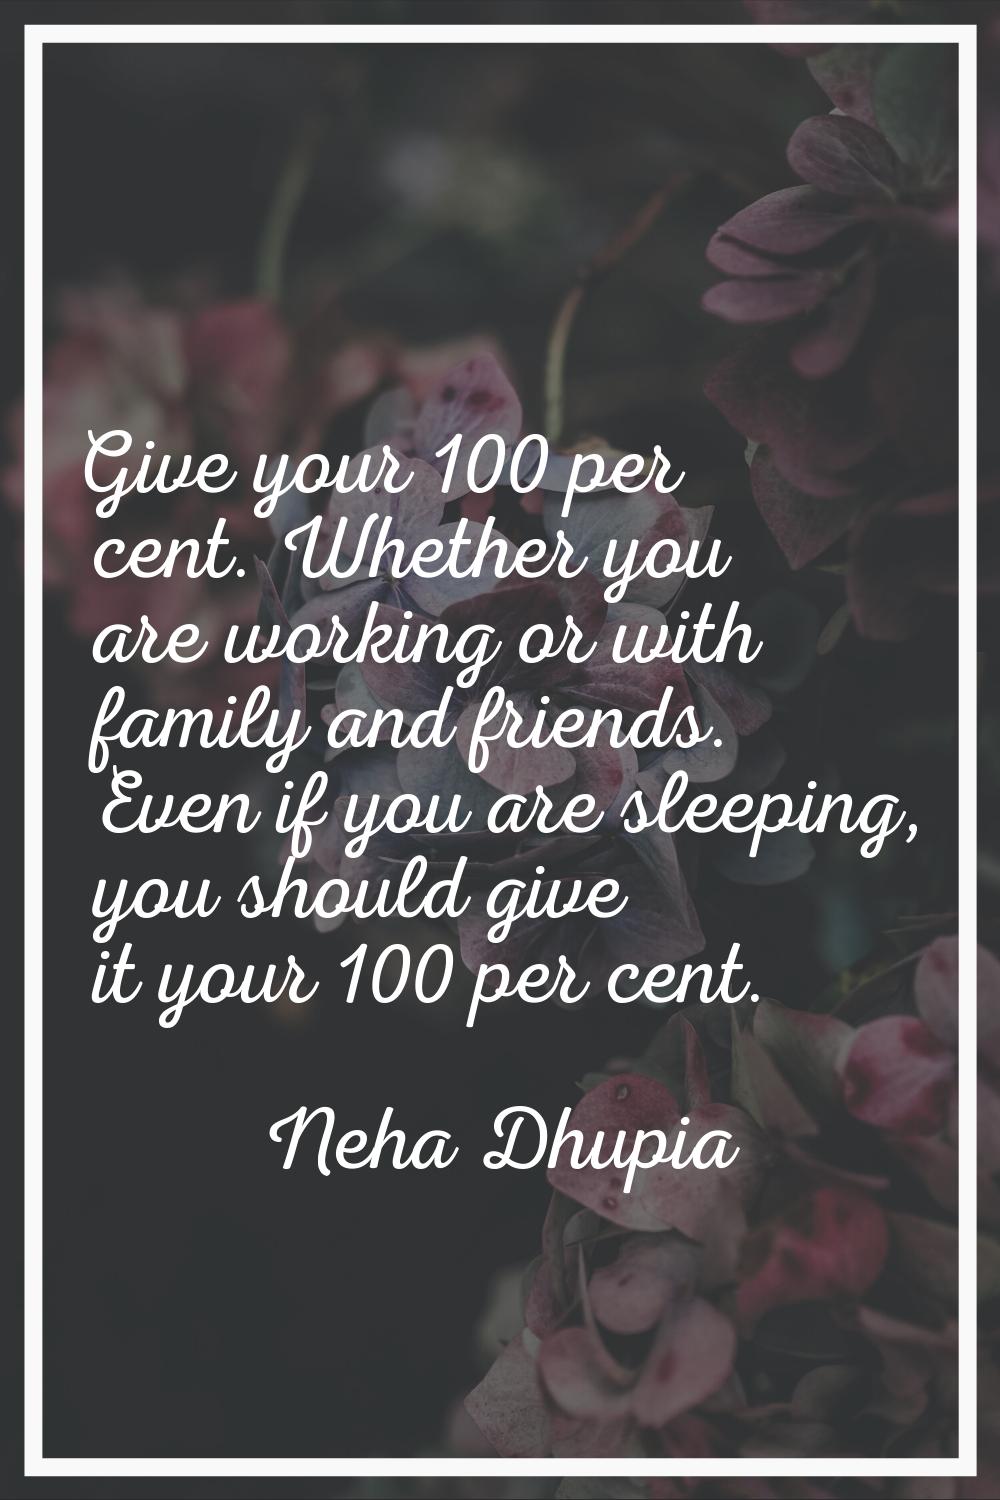 Give your 100 per cent. Whether you are working or with family and friends. Even if you are sleepin